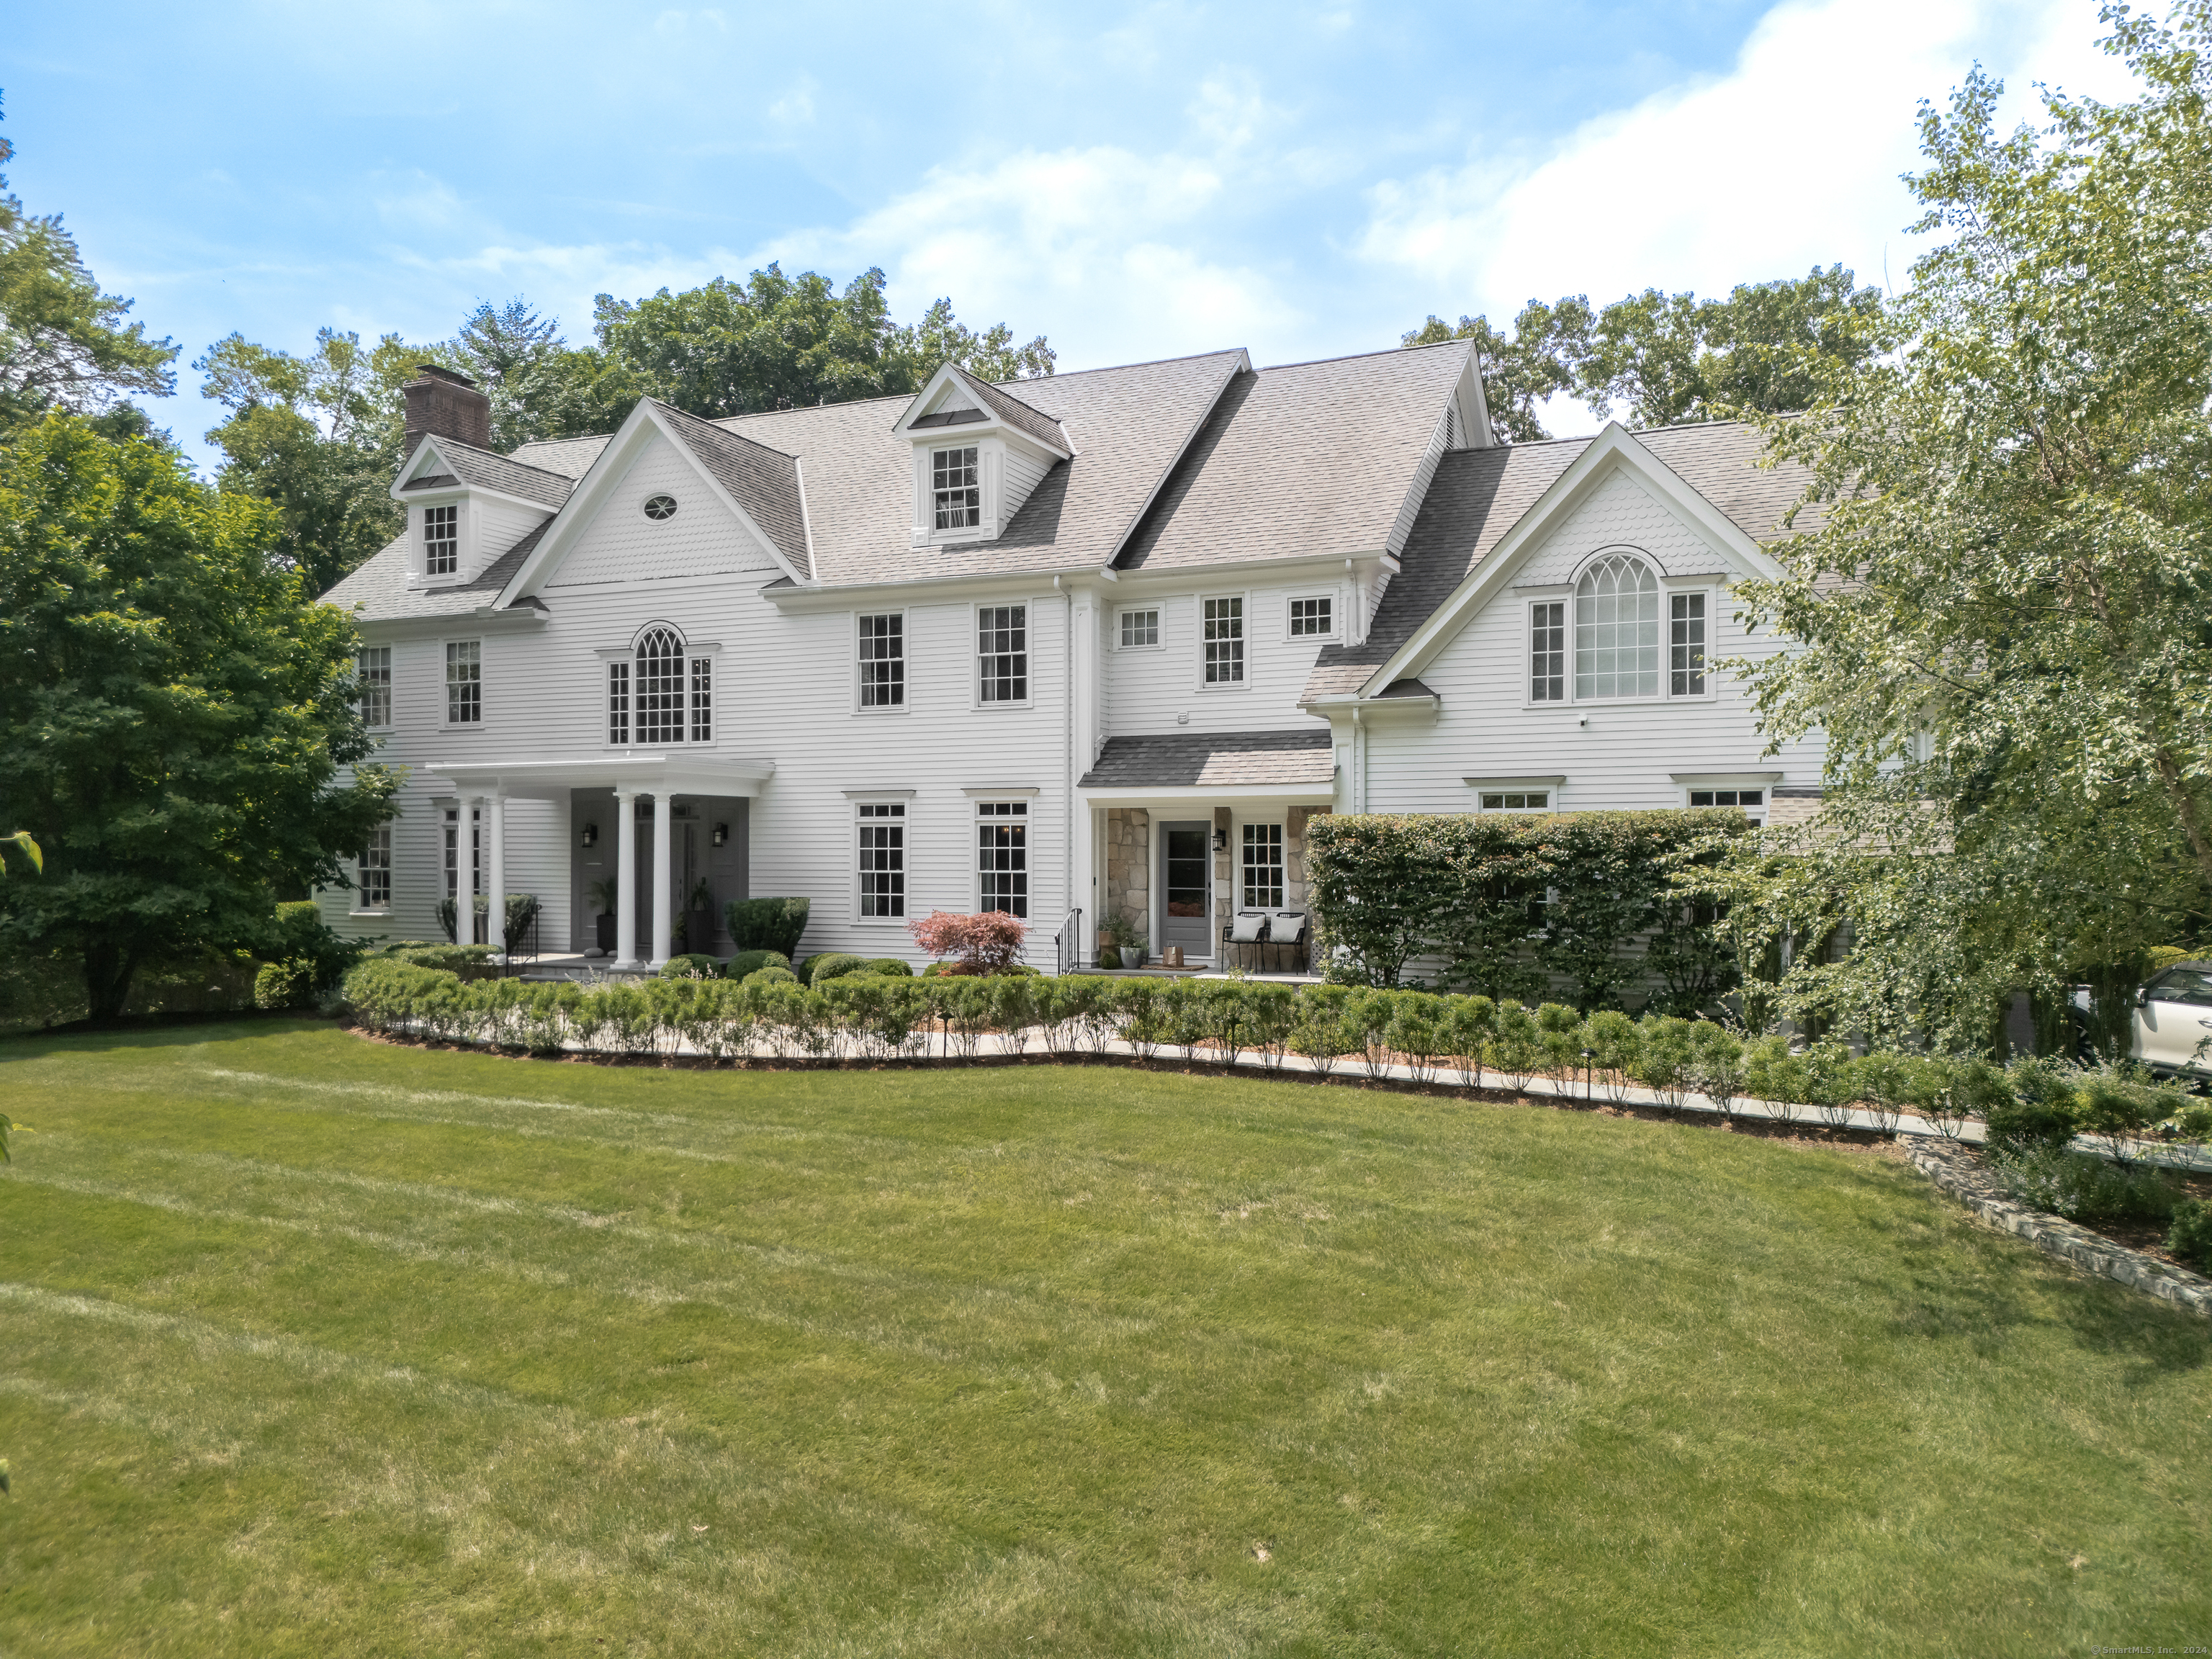 Thrilled to present 5 Timber Lane - a stunning custom Colonial situated on 1.6 acres, offering one complete privacy, yet a stone's throw from the finest shopping, dining and beaches that makes Westport so desirable. Imagined and decorated by acclaimed designer/owner, the passionate attention to detail throughout is evident: from the main level soaring double height entry, to the inviting living room with wood burning fireplace, to a formal dining room enveloped in suede wall coverings, luxurious drapes and a butler's pantry. Pass by the den, with its lacquered walls and ceiling, hidden safe and art gallery shelving - it's a space you can envision James Bond lounging in. En route to the kitchen is a Parisian-inspired mirrored bar. The chef's kitchen is what you would demand - quartz/granite abound, Thermador appliances. An open-concept floor plan seamlessly blending indoor and outdoor spaces. The outdoor is meticulous from its perfectly manicured grounds - with abundant space for pool - stone patio, full Viking kitchen. The spacious master suite epitomizes luxury with a fireplace, soaking tub and vaulted ceiling. 3 additional bedrooms, each en-suite, are located on this level along with a media room equipped with state of the art technology. The walk out lower level has the home's guest suite, home office/studio. A sommelier-quality custom cellar to showcase the finest of wine collections. This home truly needs to be seen to be fully appreciated.